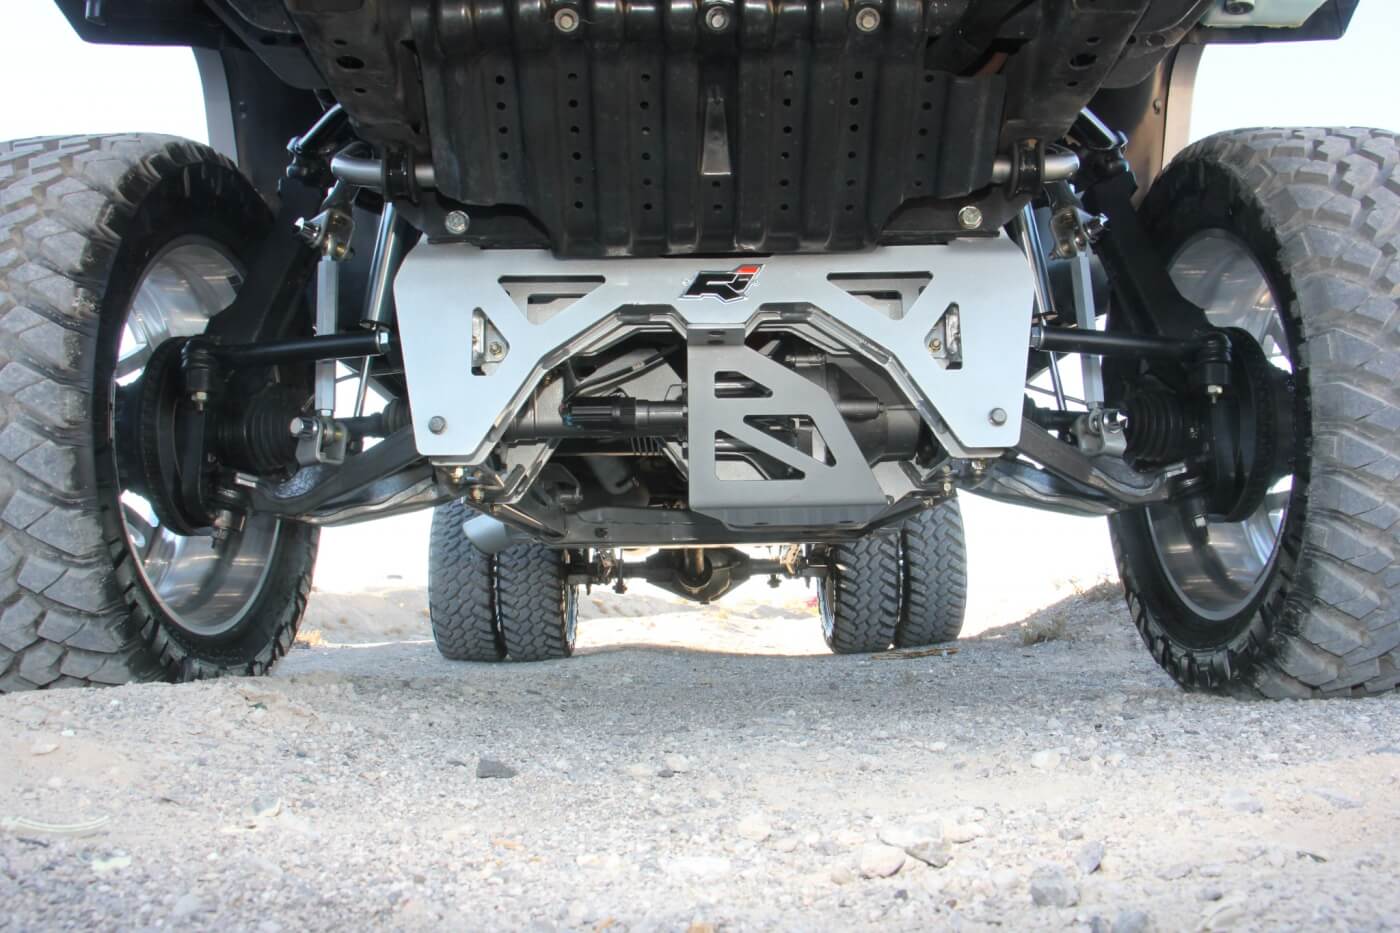 Here you can see the front half of the Rize 8-10-inch suspension. It’s critical that the shocks be matched to the suspension to keep all that weight under control. 